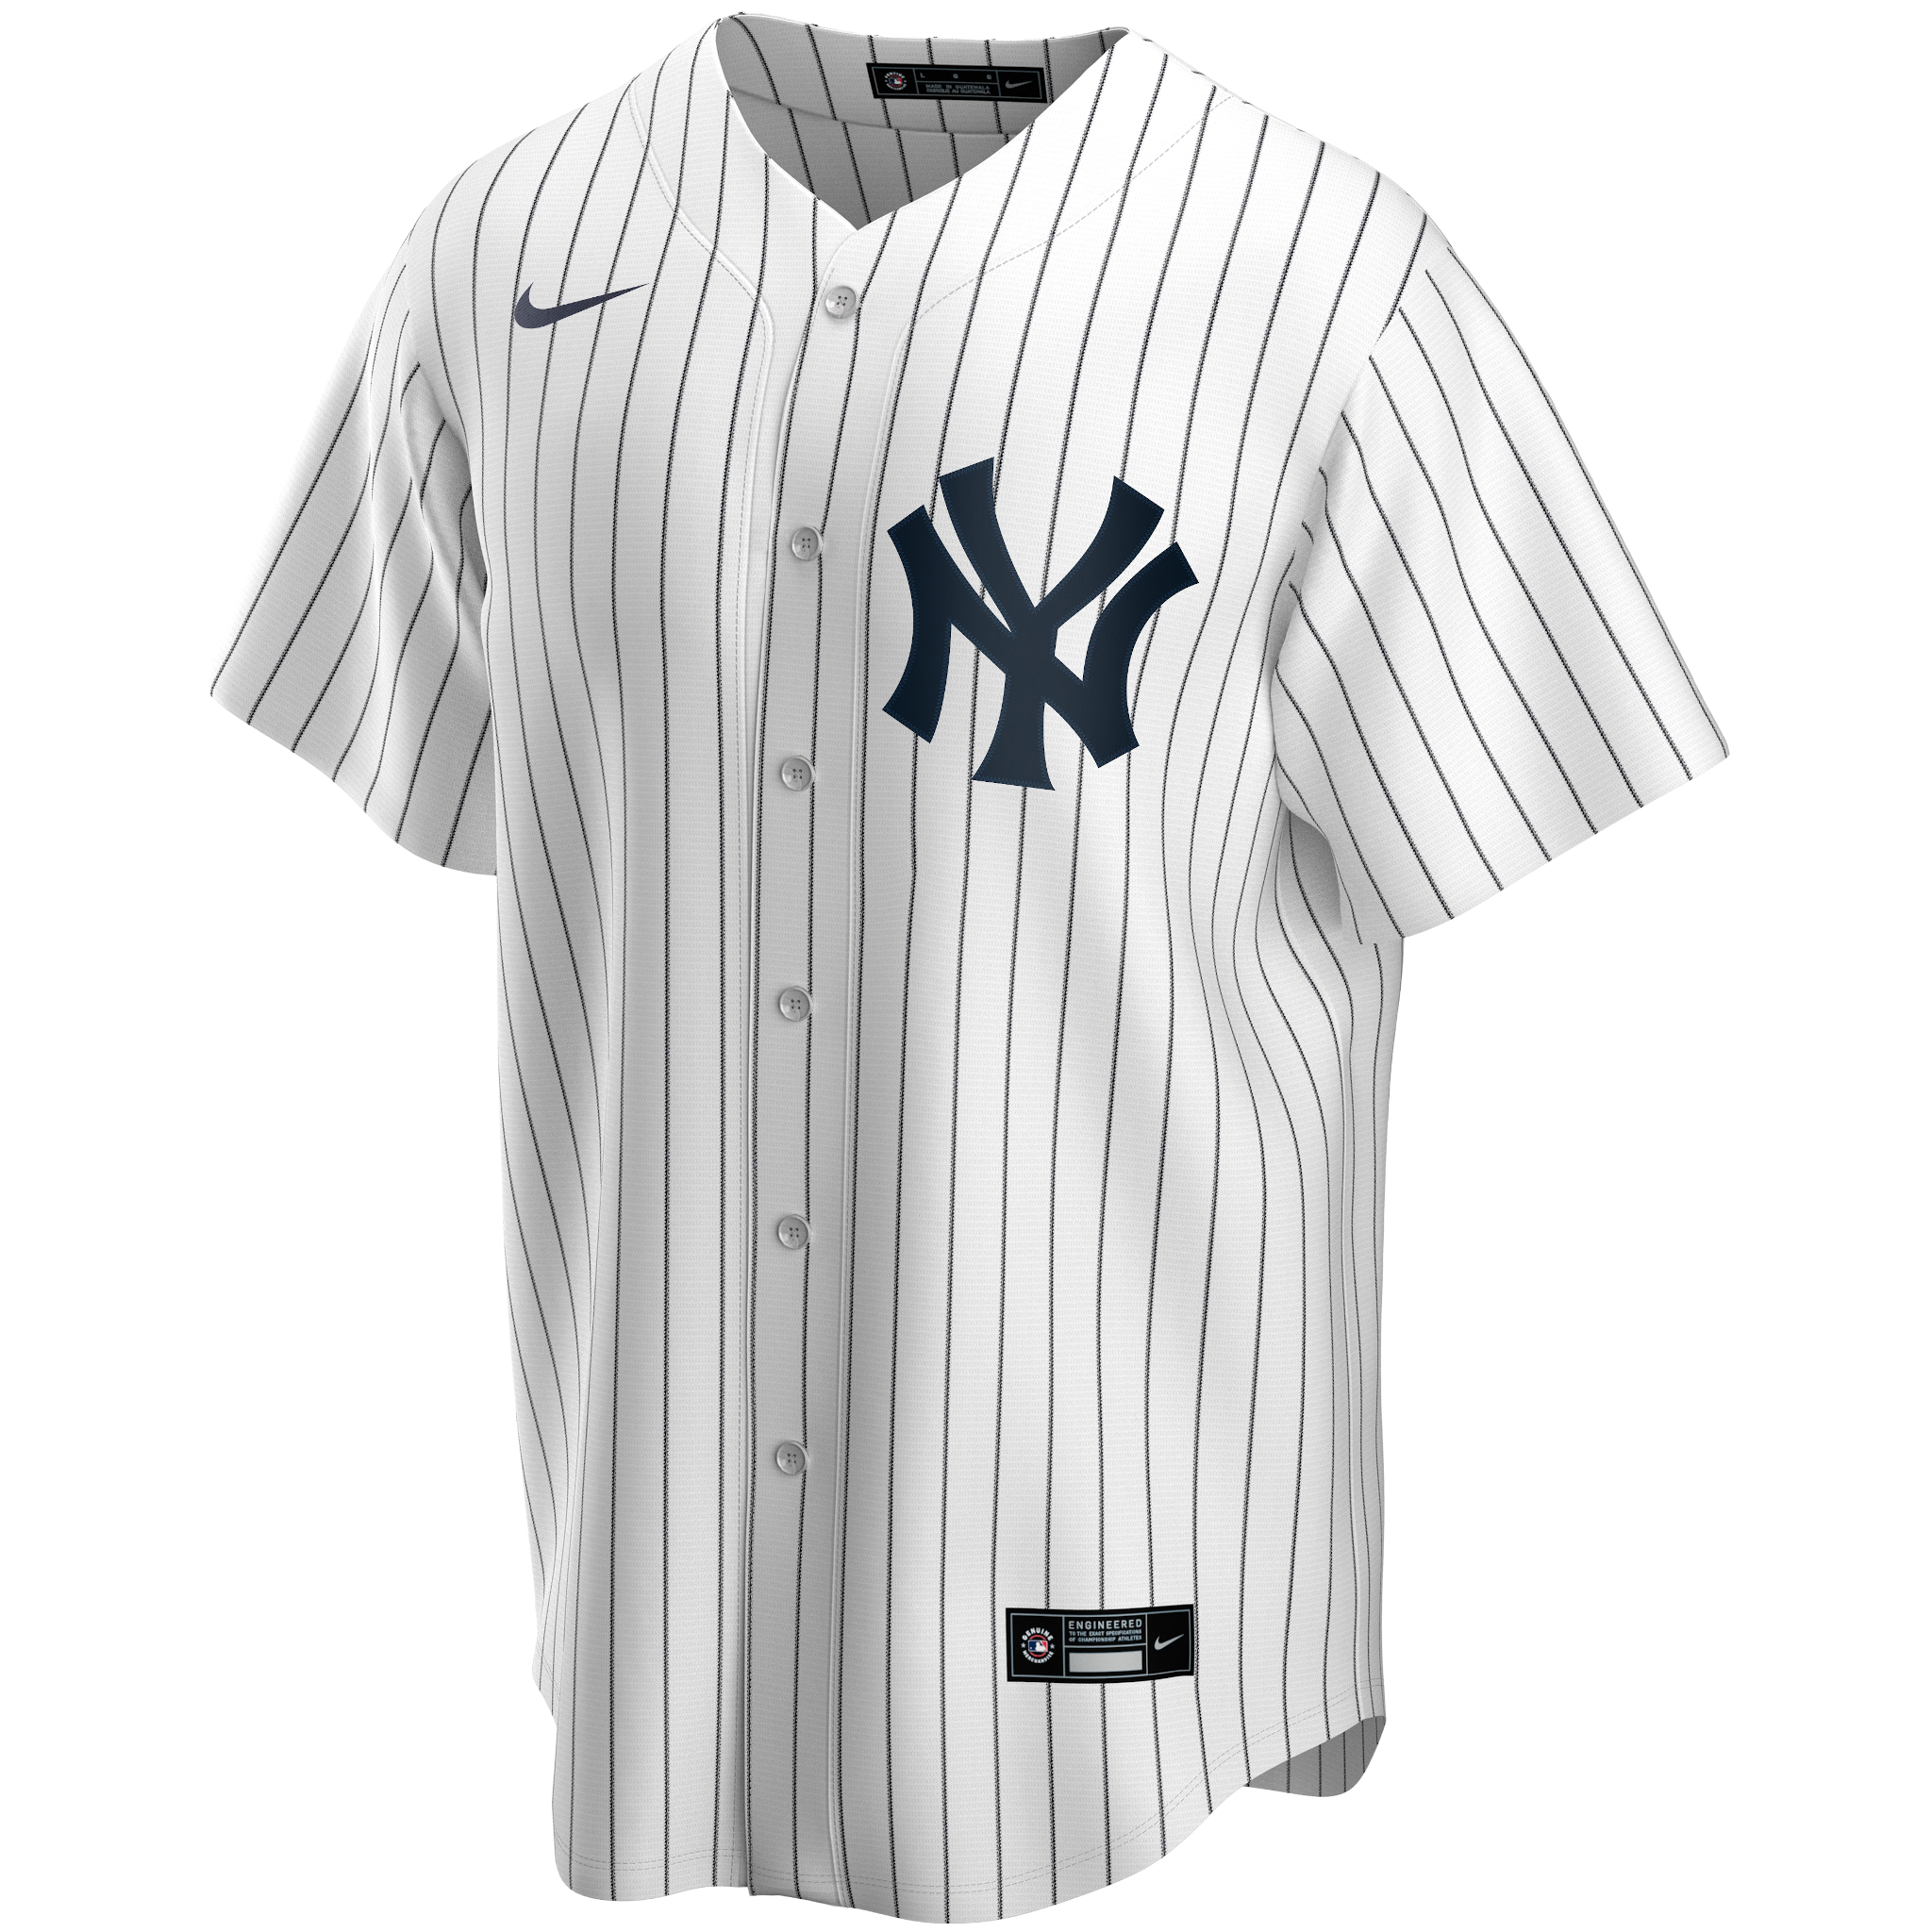 NEW**** MICKEY MANTLE******NEW YORK YANKEES GRAY AWAY JERSEY M&N 1951  PATCH 44L